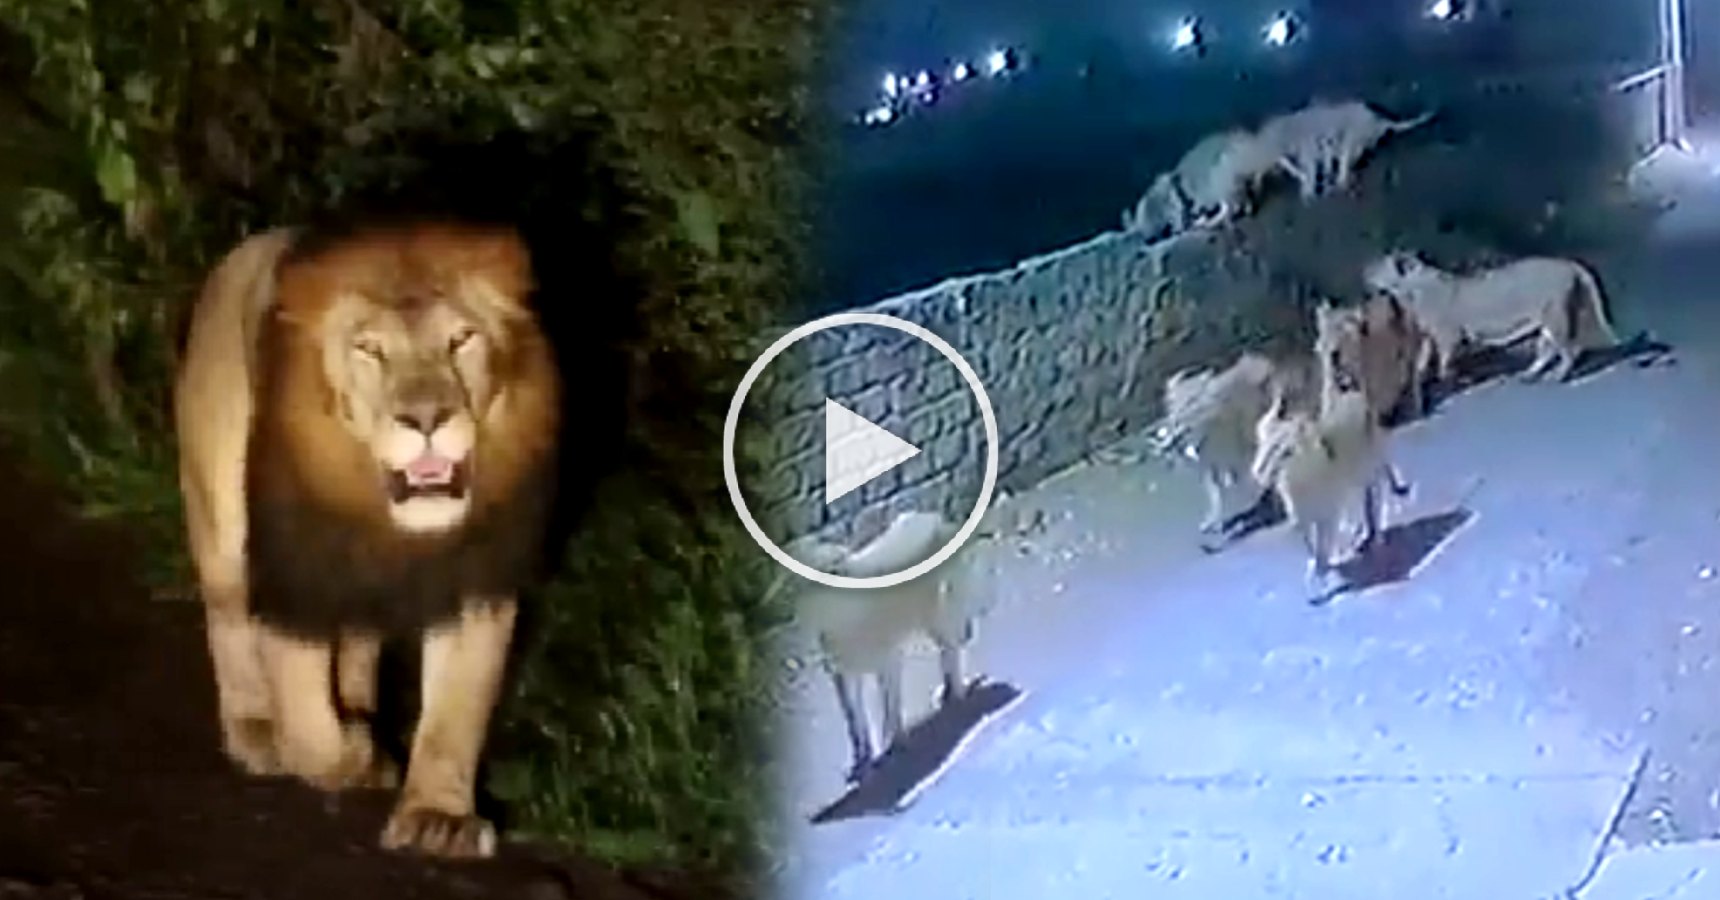 Lions walking on roads of Gujrat at night Viral Video